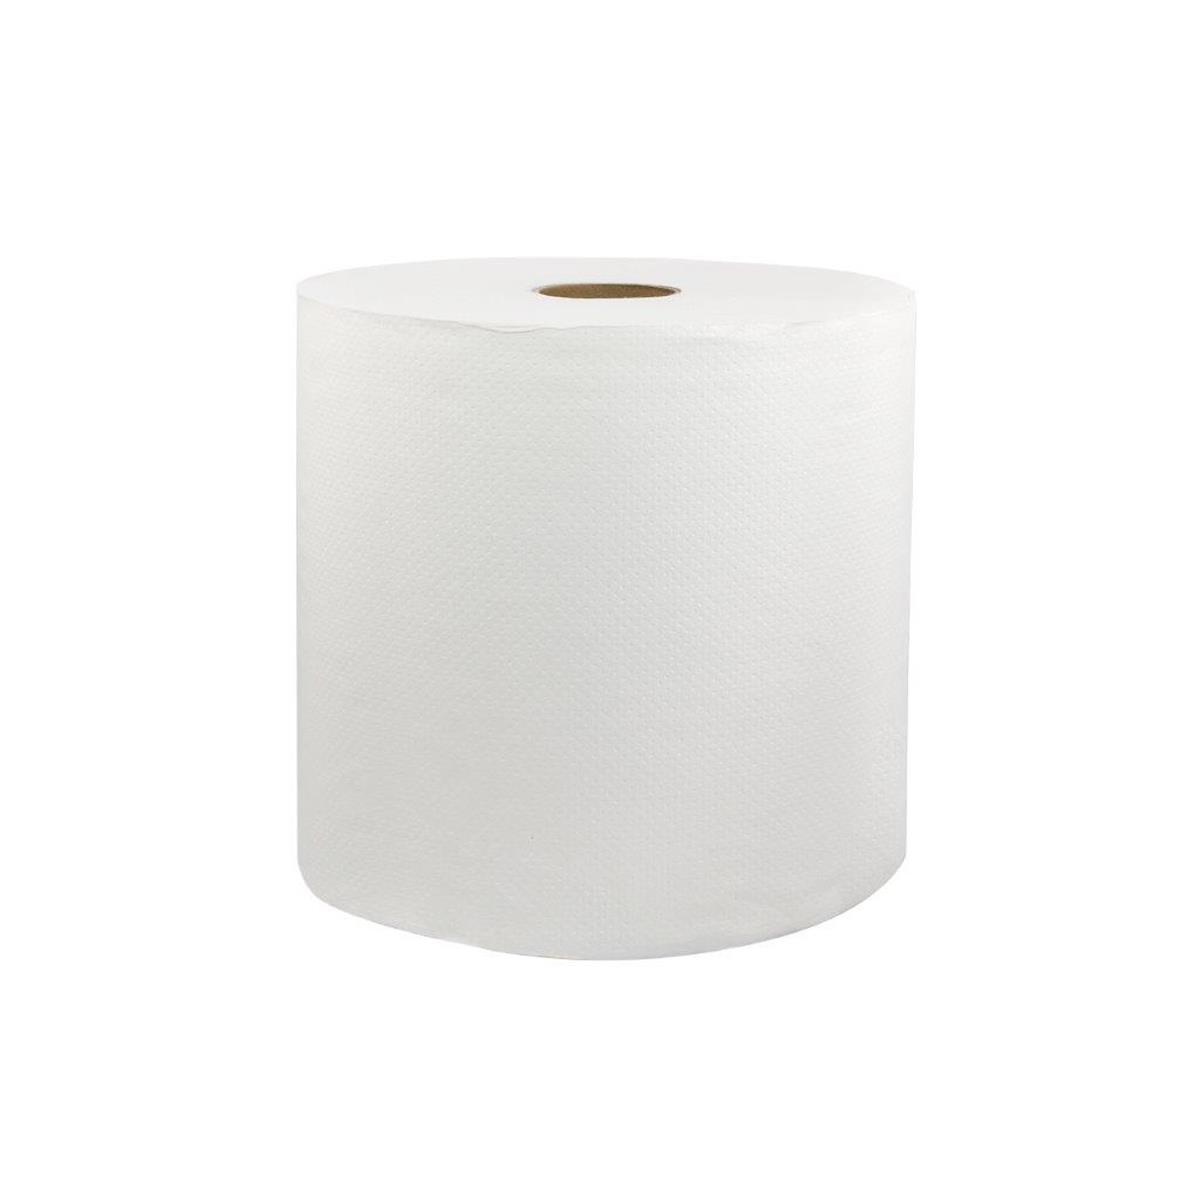 46529 Pec 8 X 800 In. White Hard Wound Roll Towels - Pack Of 6